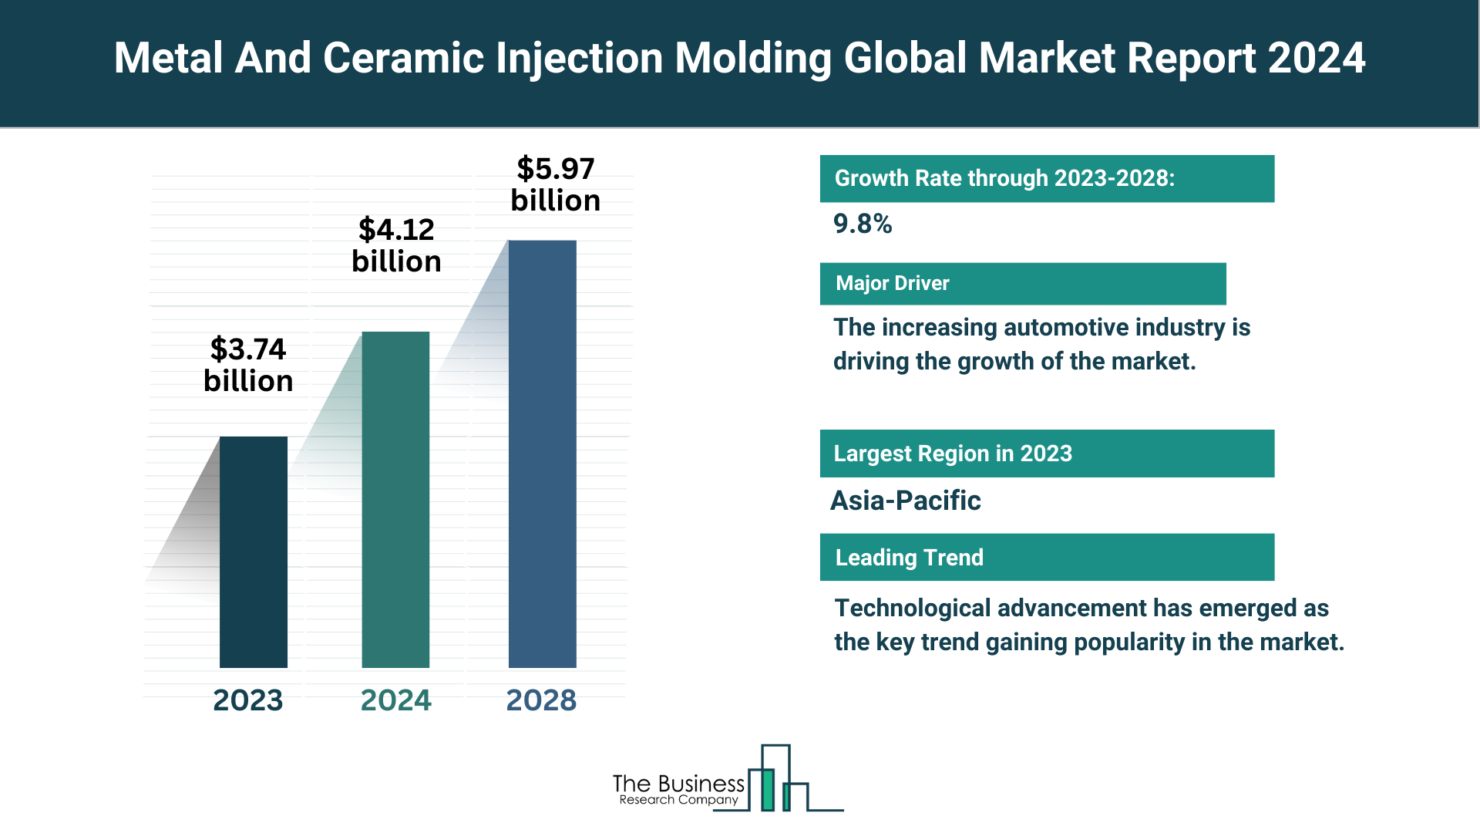 What Are The 5 Takeaways From The Metal And Ceramic Injection Molding Market Overview 2024